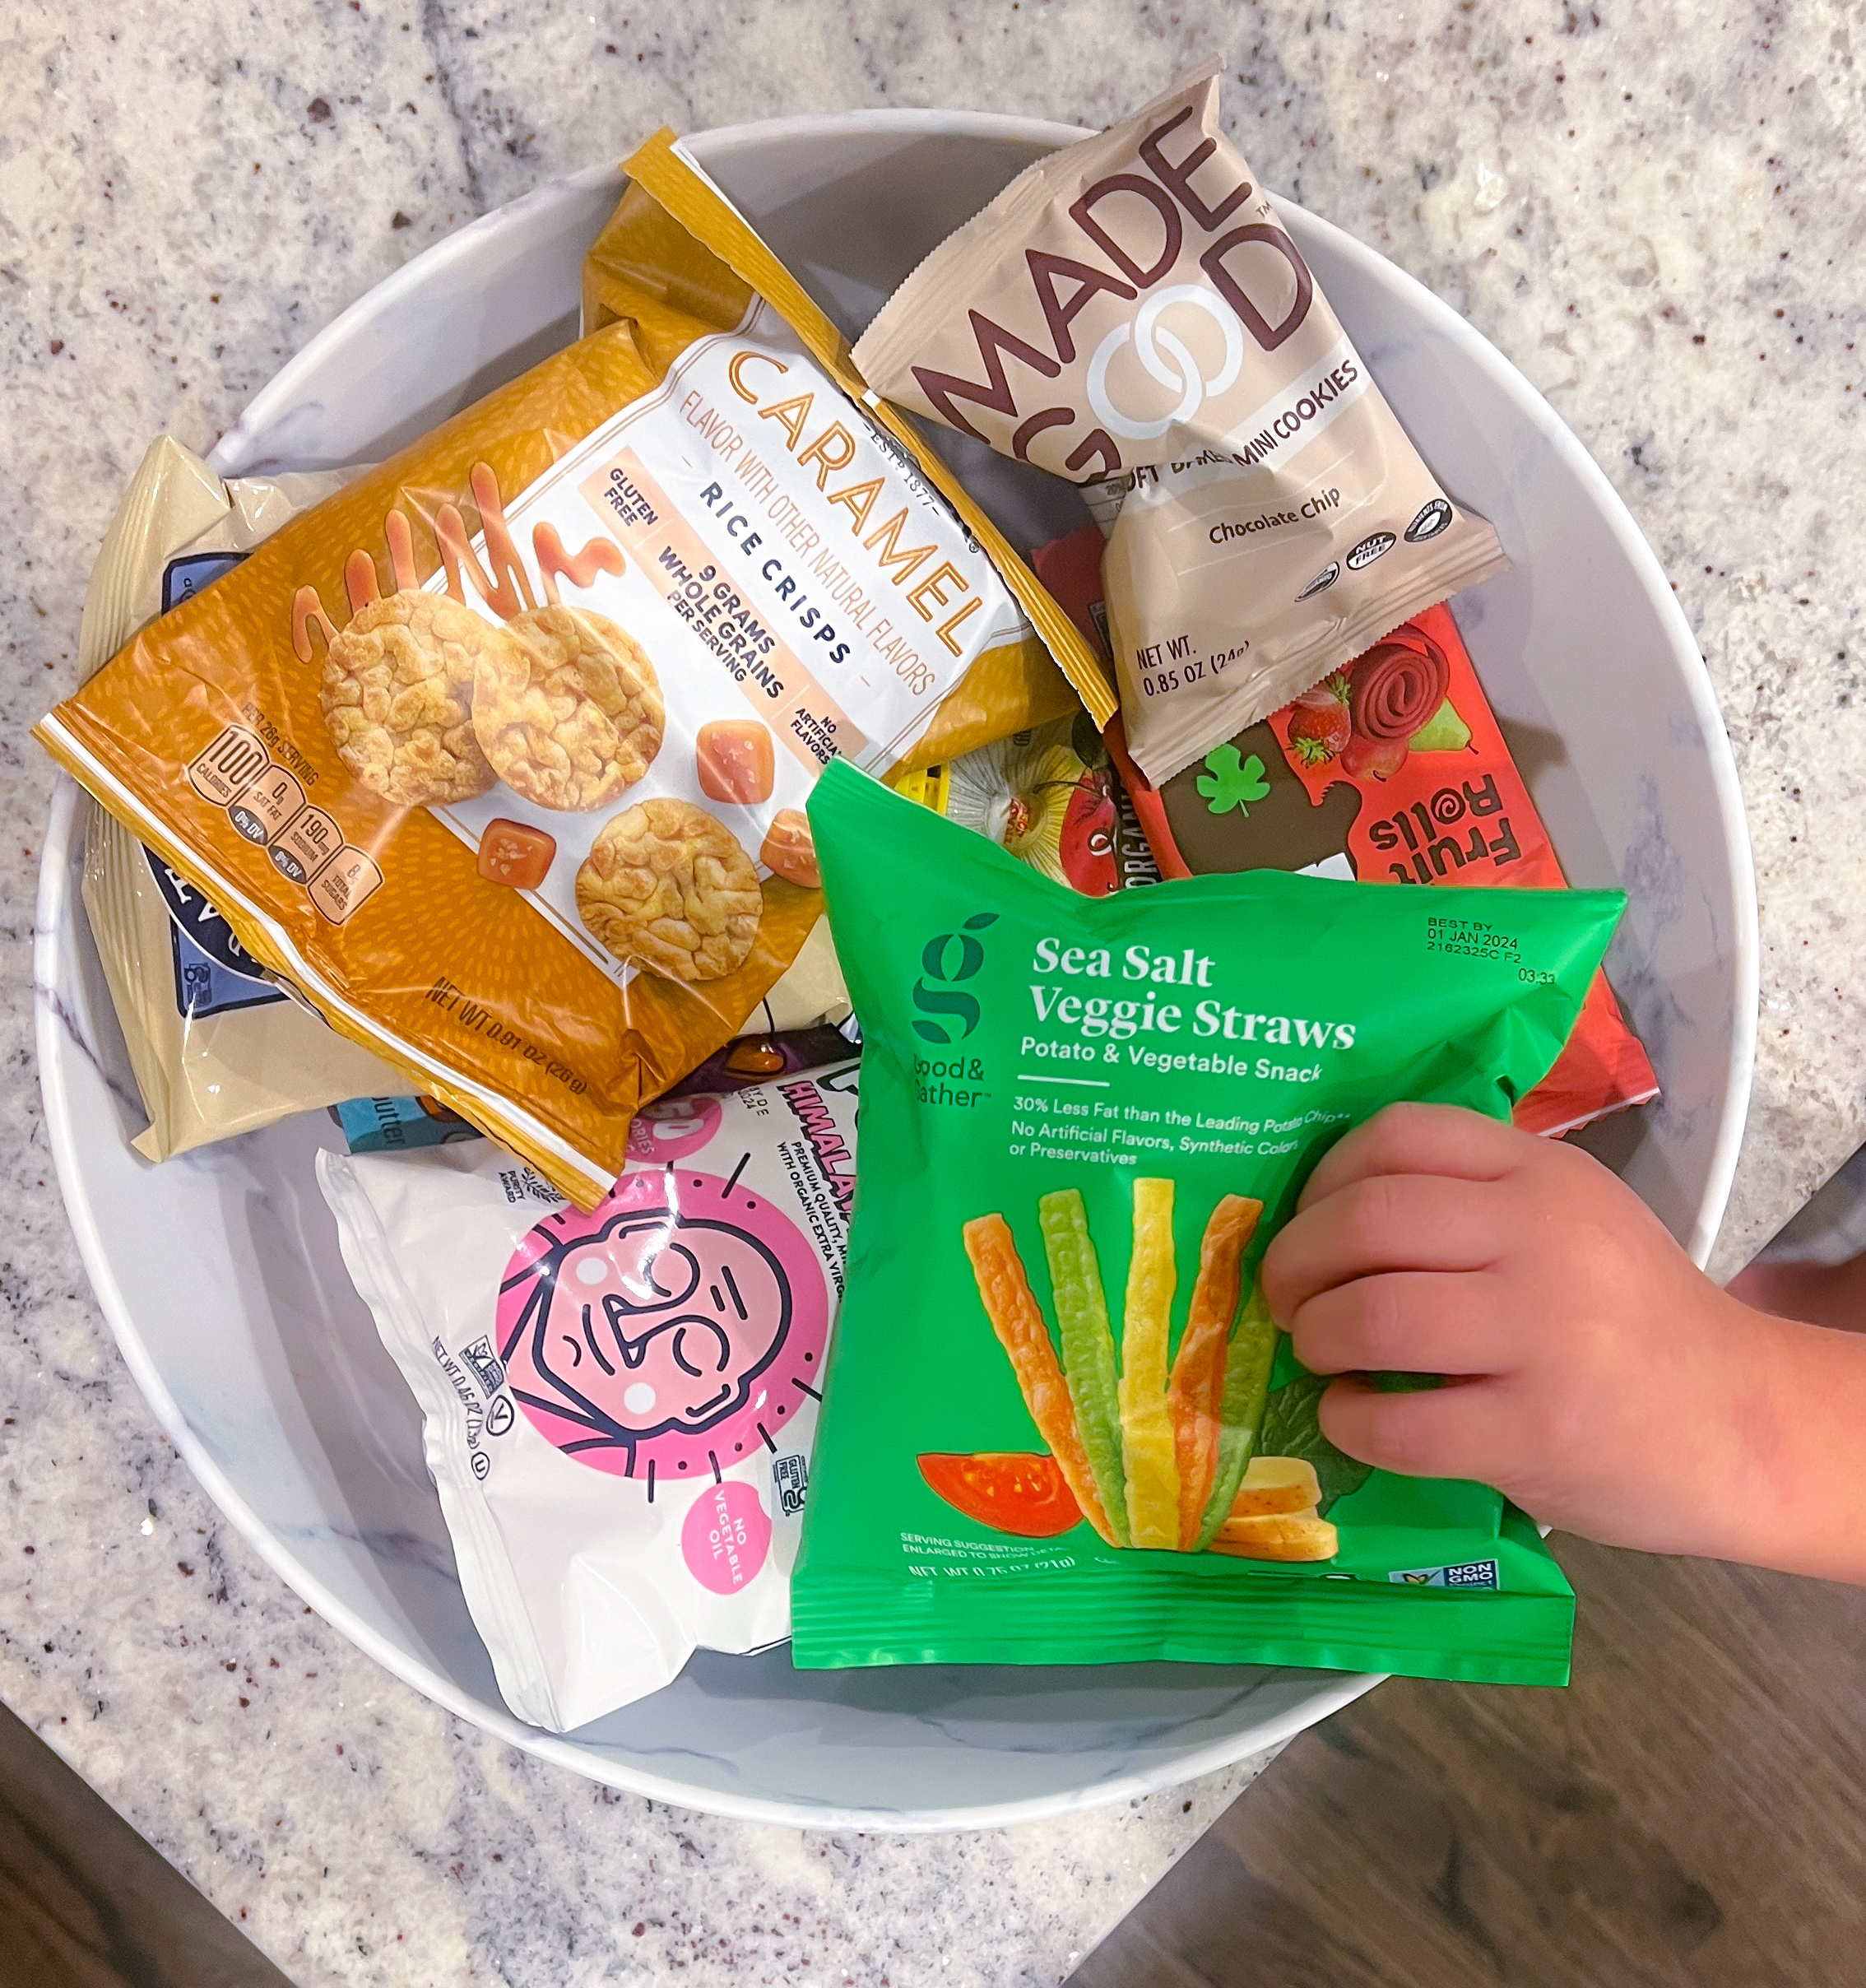 Discover 12 cheap and healthy snacks for your kids to bring to school – this is your go-to resource for budget-friendly, nutritious treats!